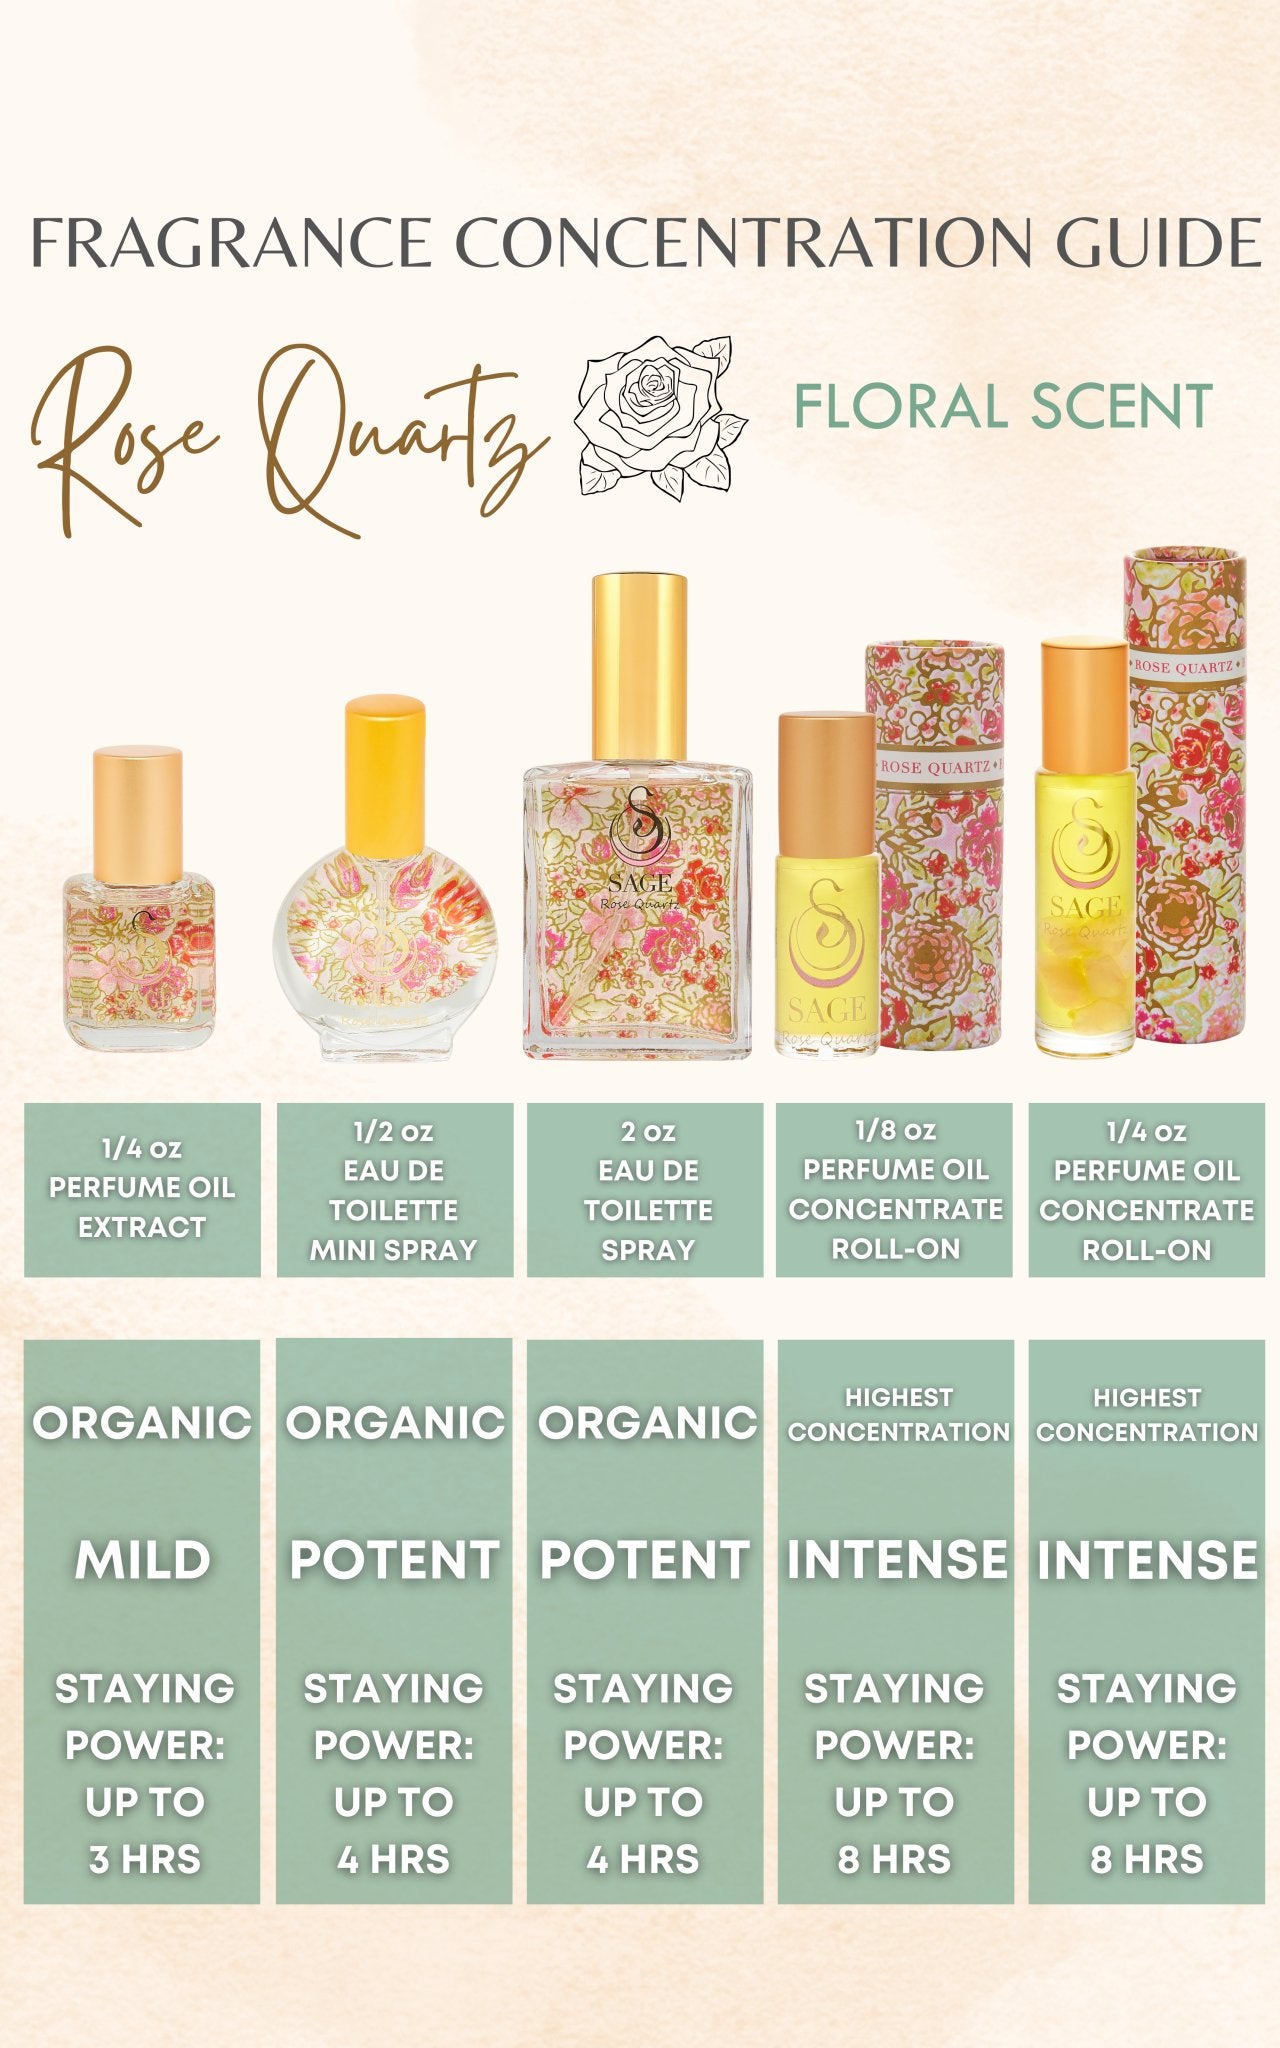 Rose Quartz 1/8 oz Perfume Oil Concentrate Roll-On by Sage - The Sage Lifestyle